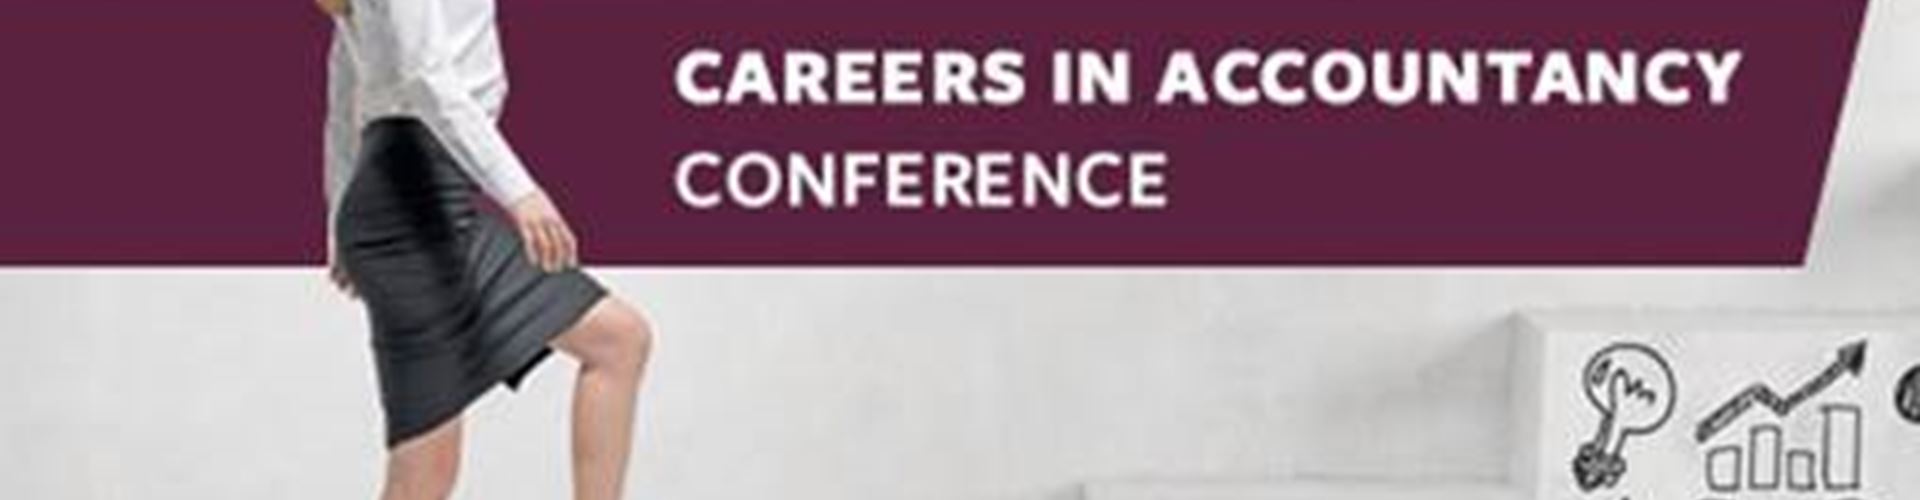 Careers in Accountancy Conference Coming Up